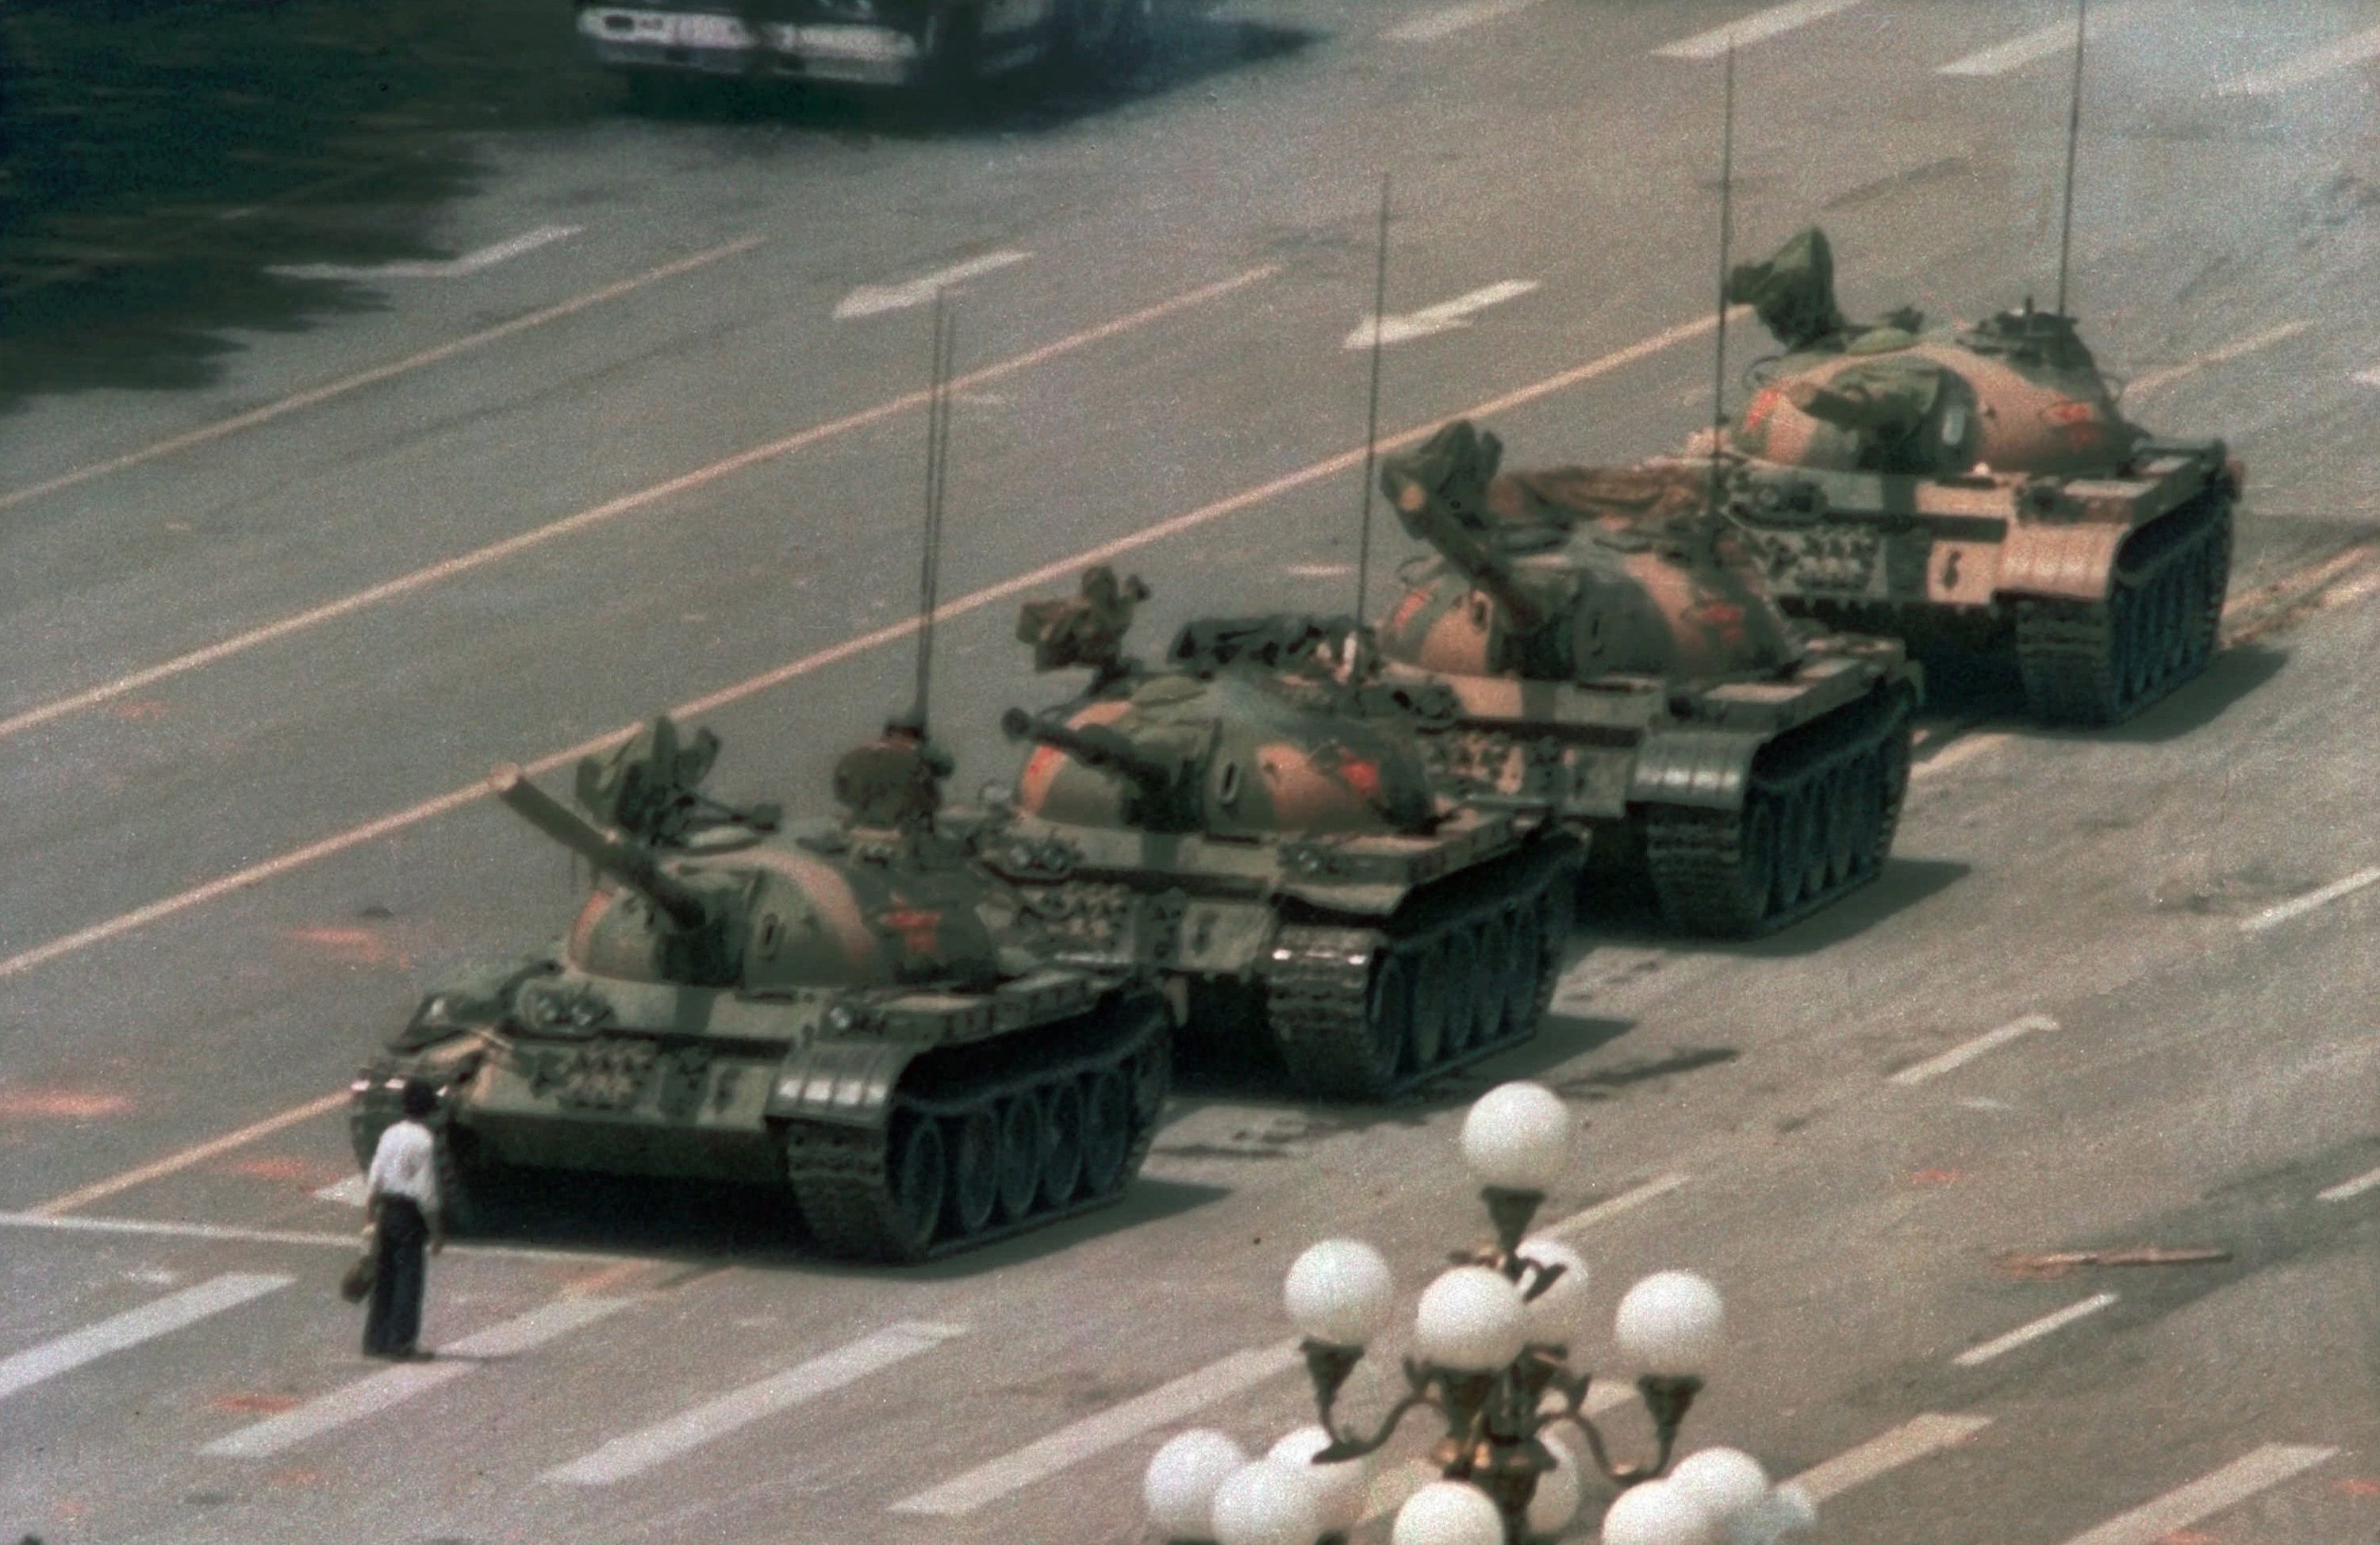 Chinese man stands in Tiananmen